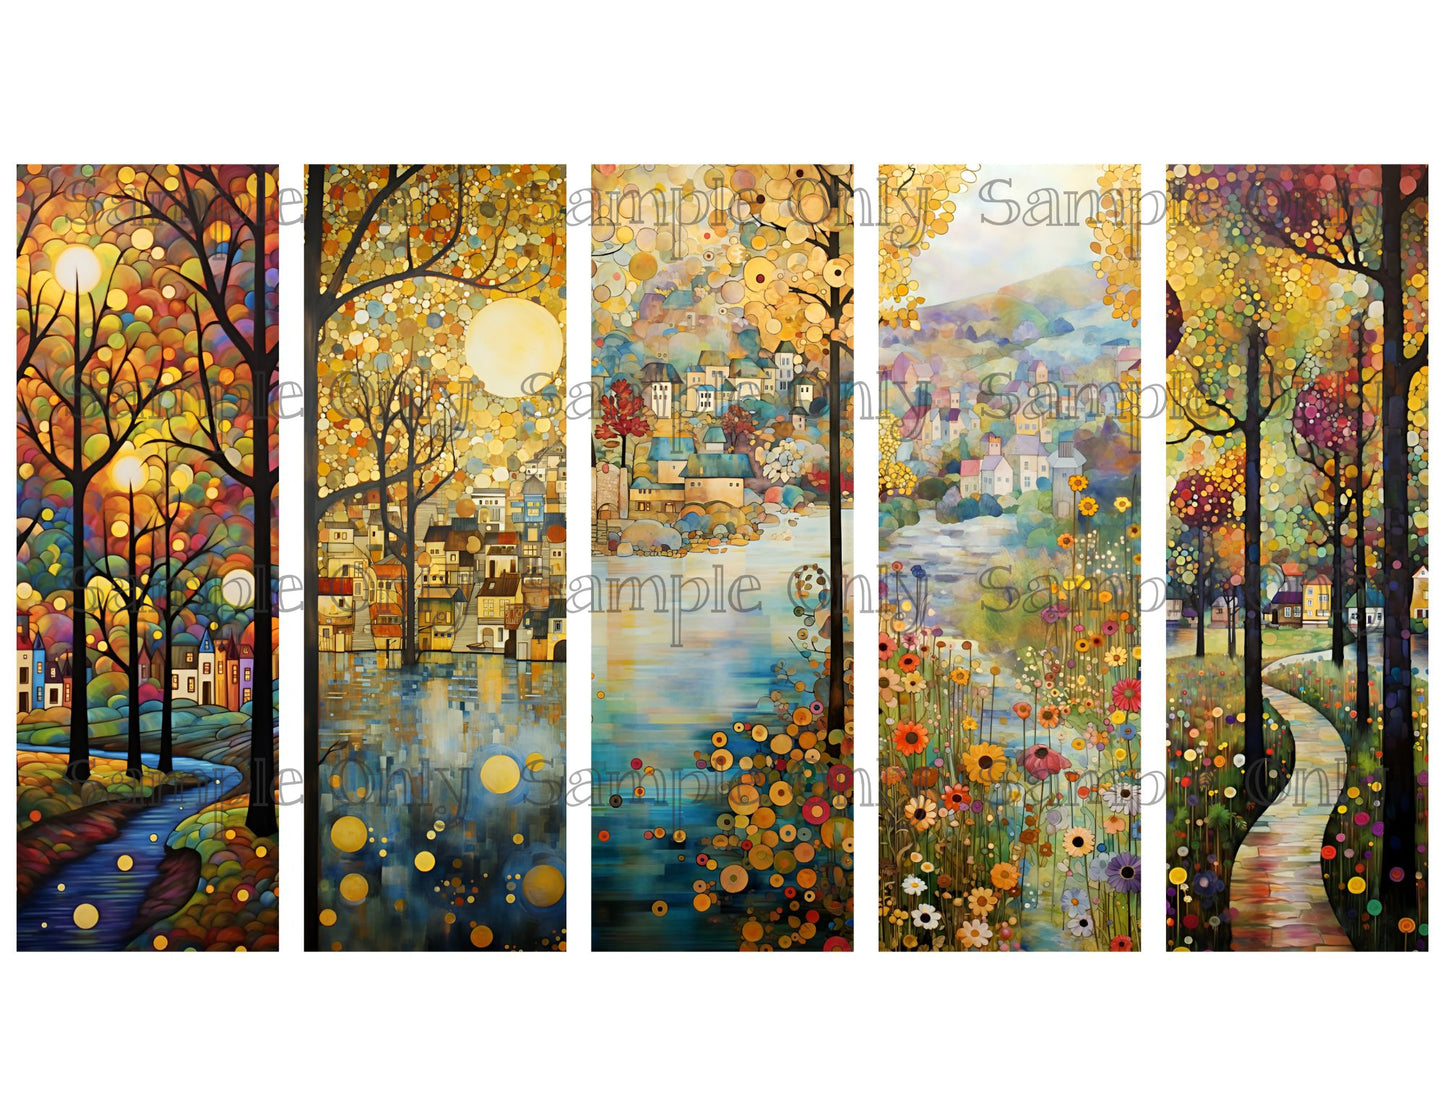 Scenic Village Bookmark Set 04 Printed Water Soluble Image Transfer Sheet For Polymer Clay